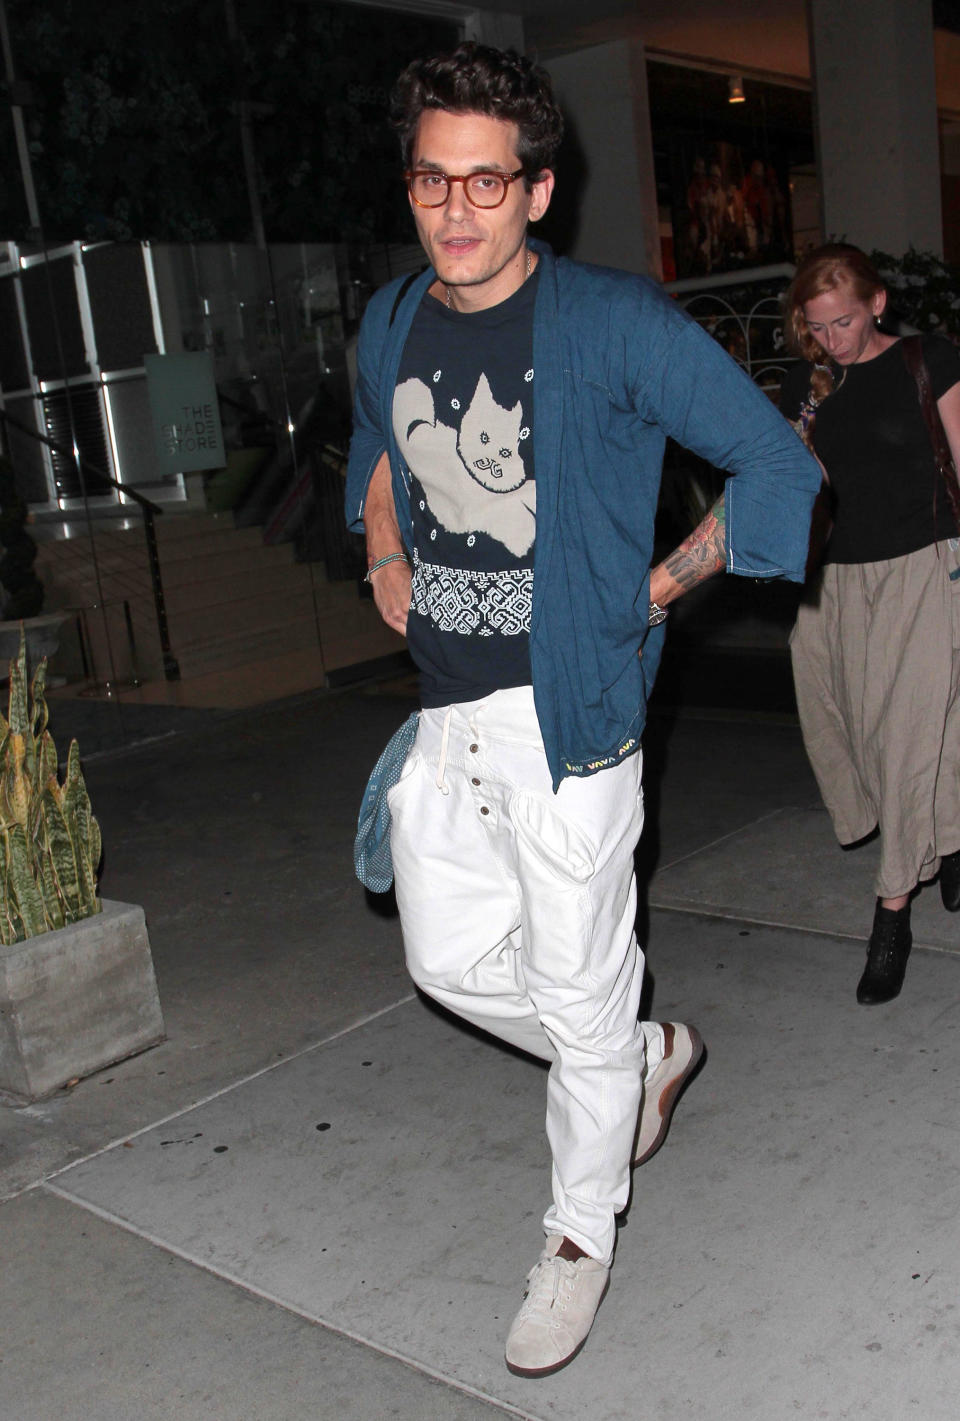 John Mayer enjoyed dinner out at Madeo Restaurant on June 2 in West Hollywood, California.